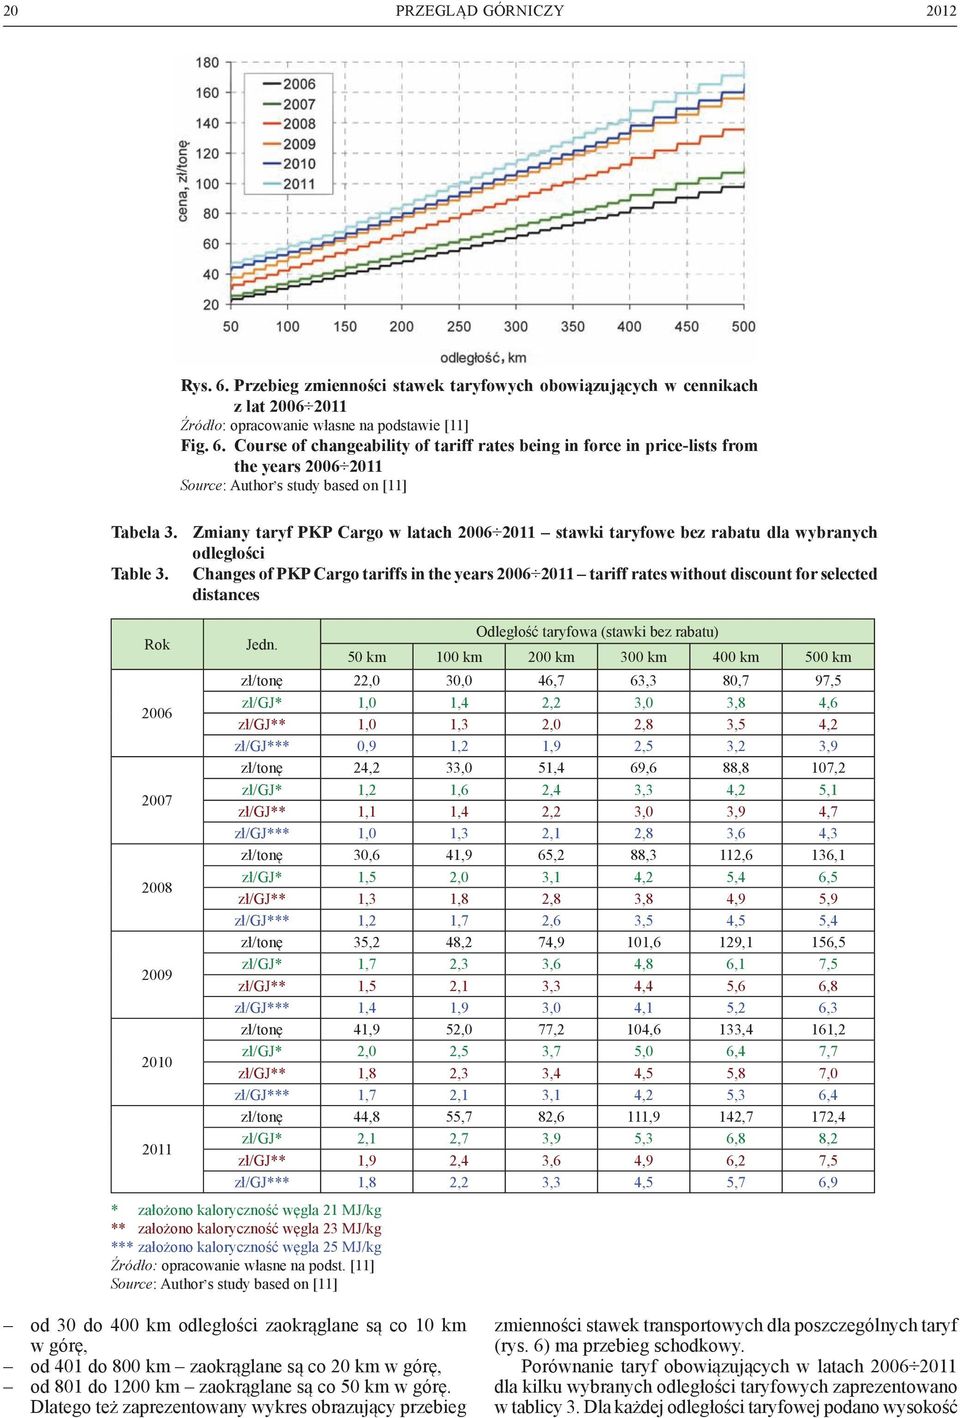 Changes of PKP Cargo tariffs in the years 2006 2011 tariff rates without discount for selected distances Rok 2006 2007 2008 2009 2010 2011 Jedn.